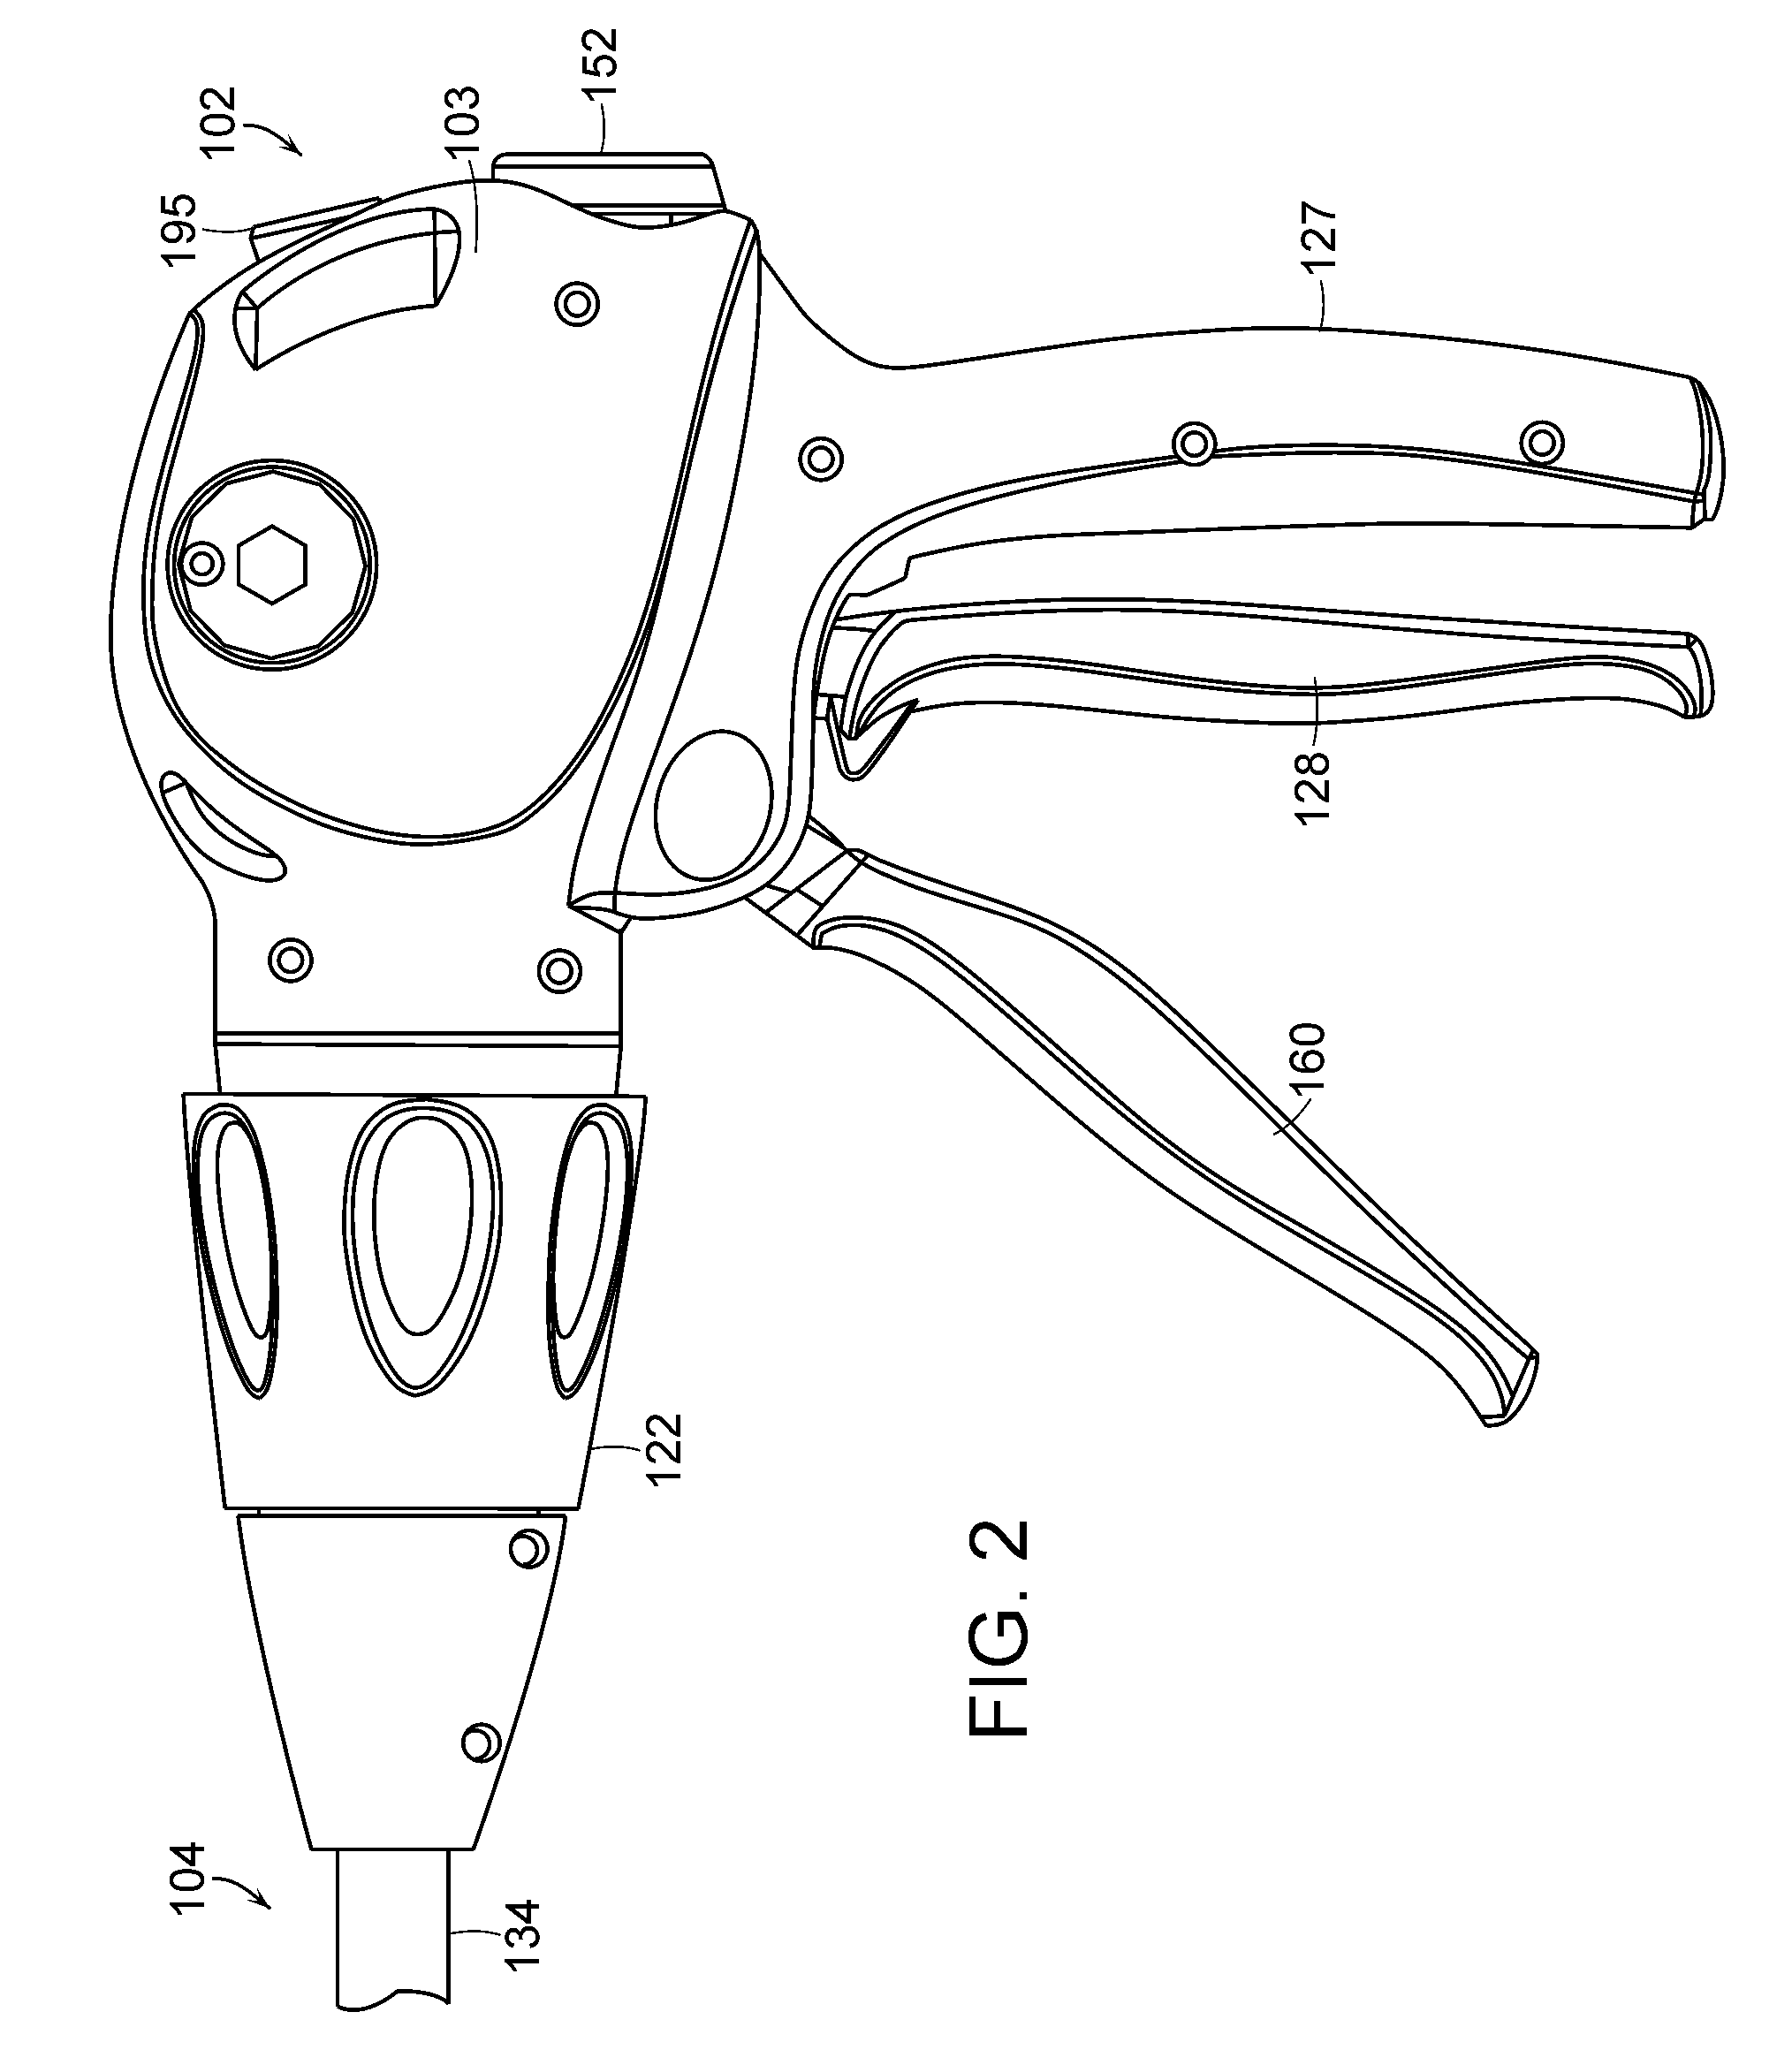 Surgical stapling instrument with a return mechanism